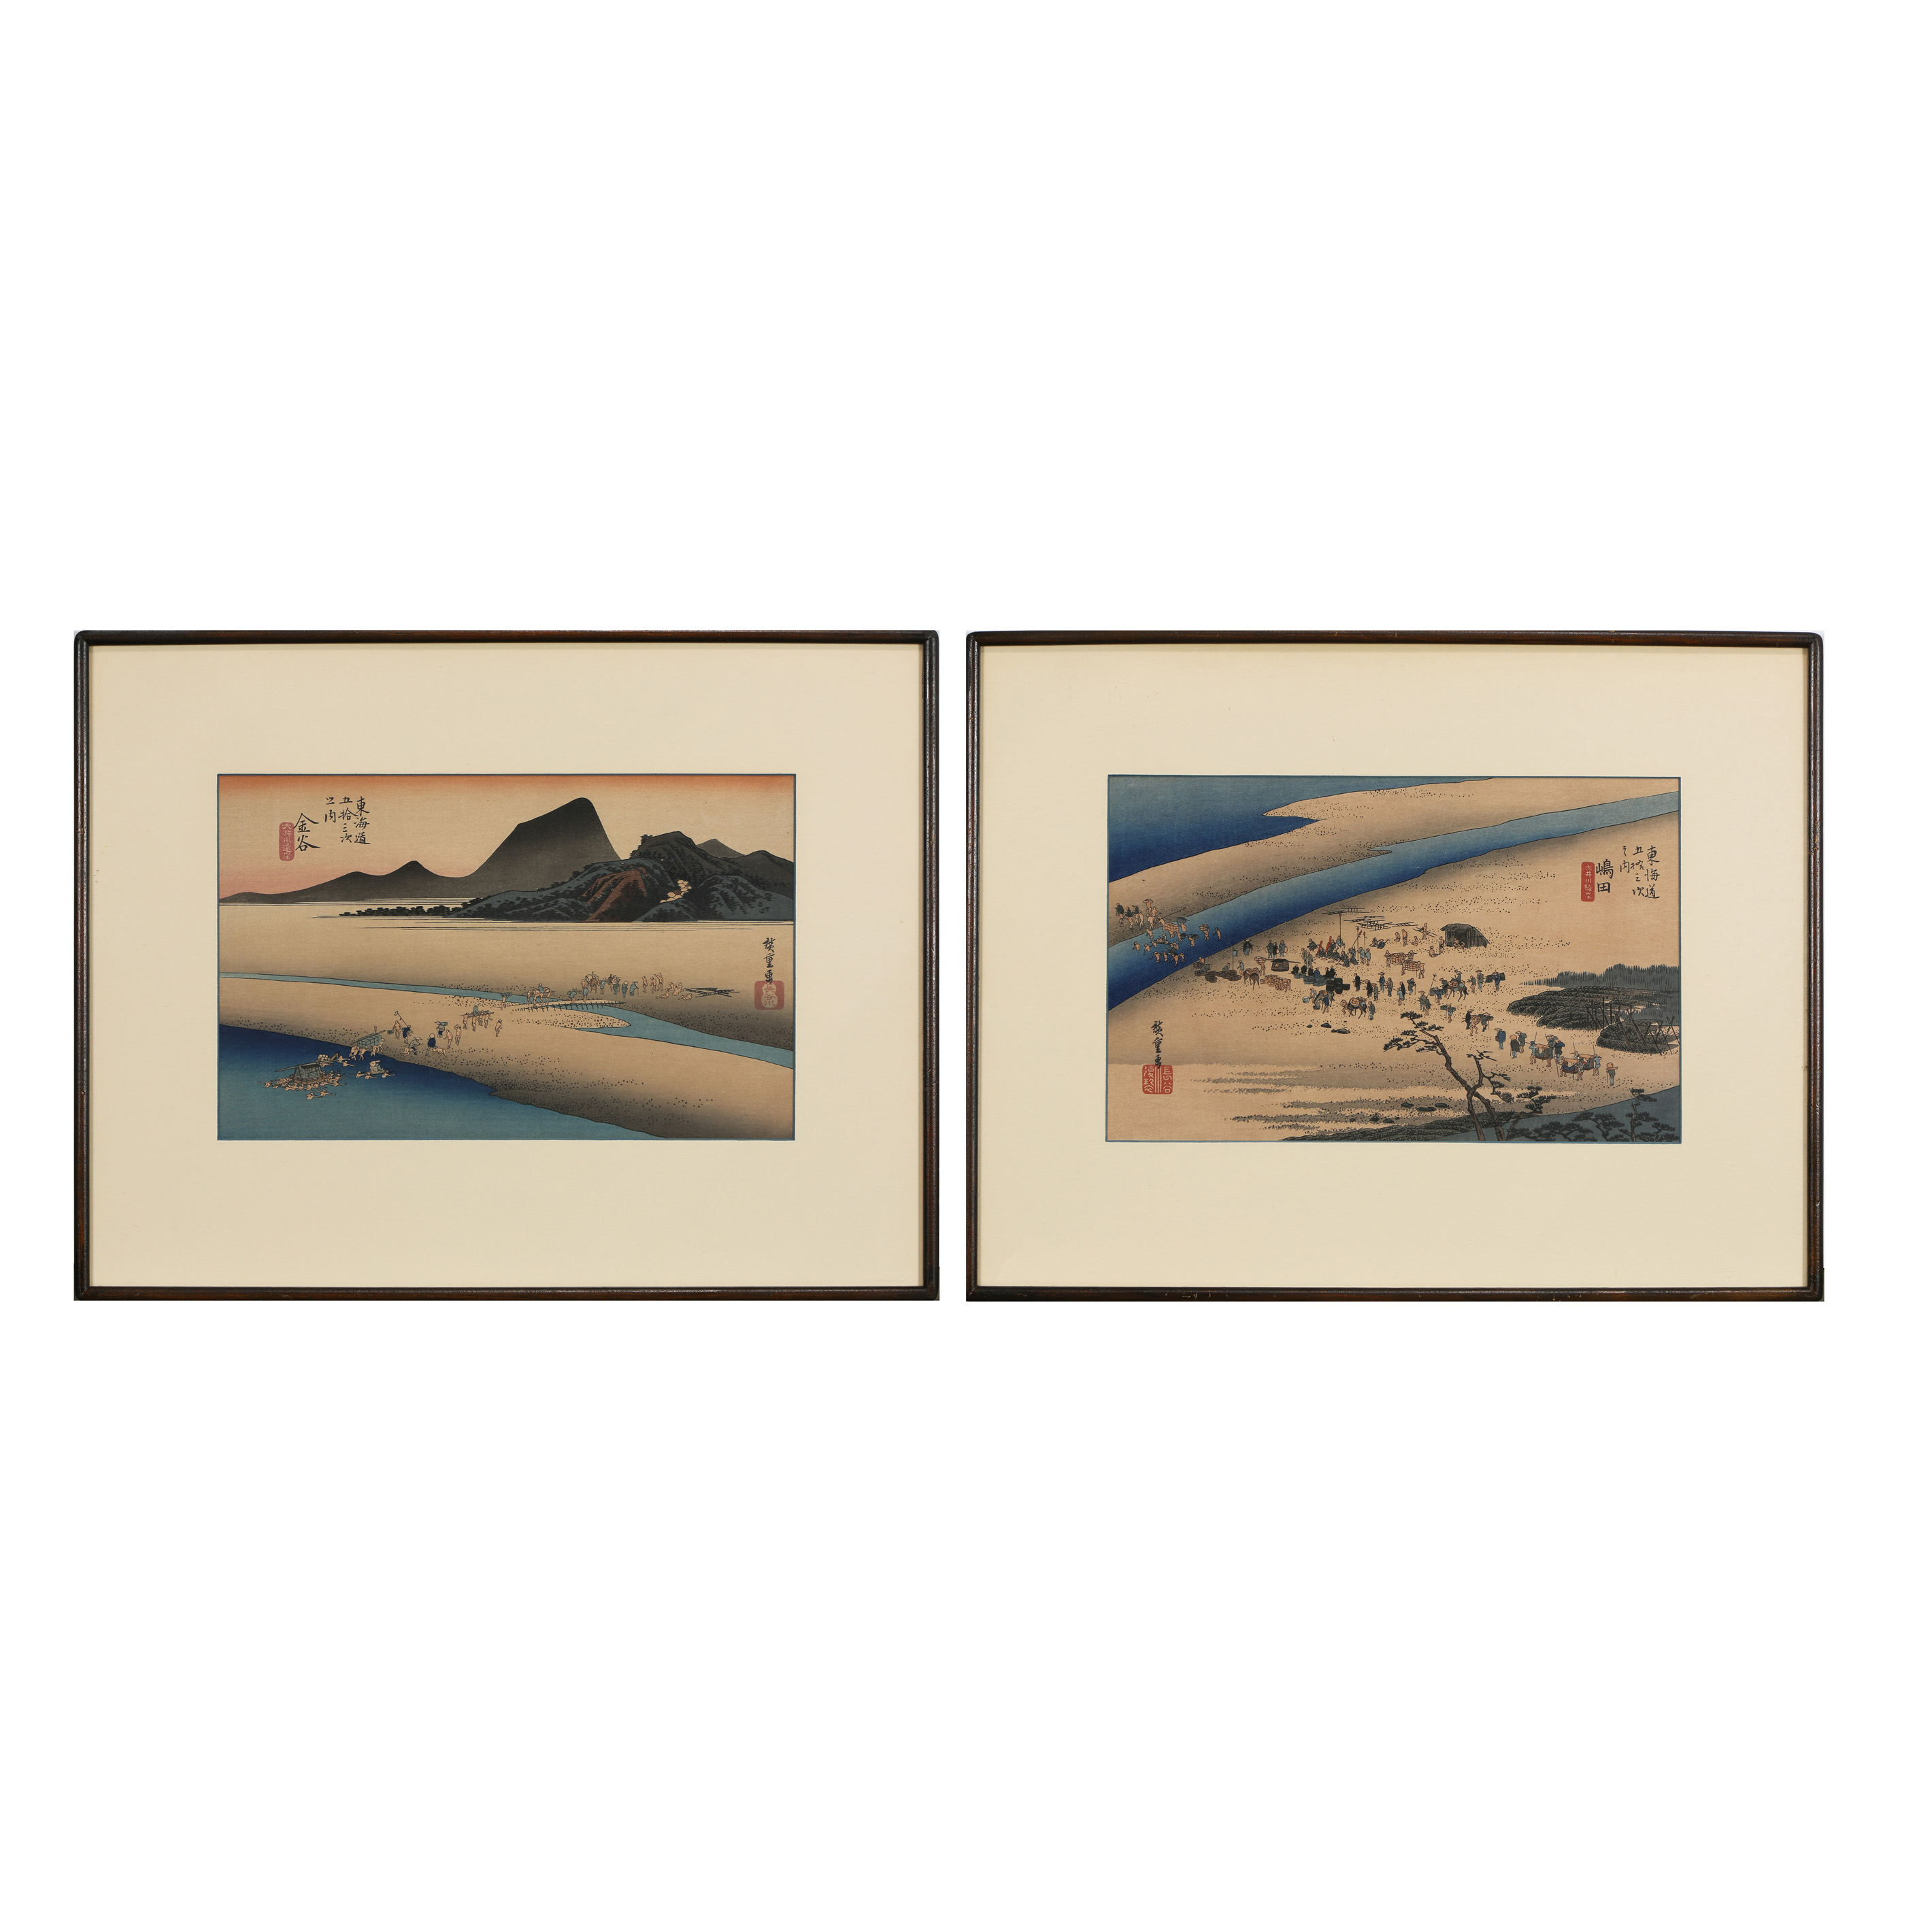  LOT OF 3 JAPANESE WOODBLOCK PRINTS 3a44a5